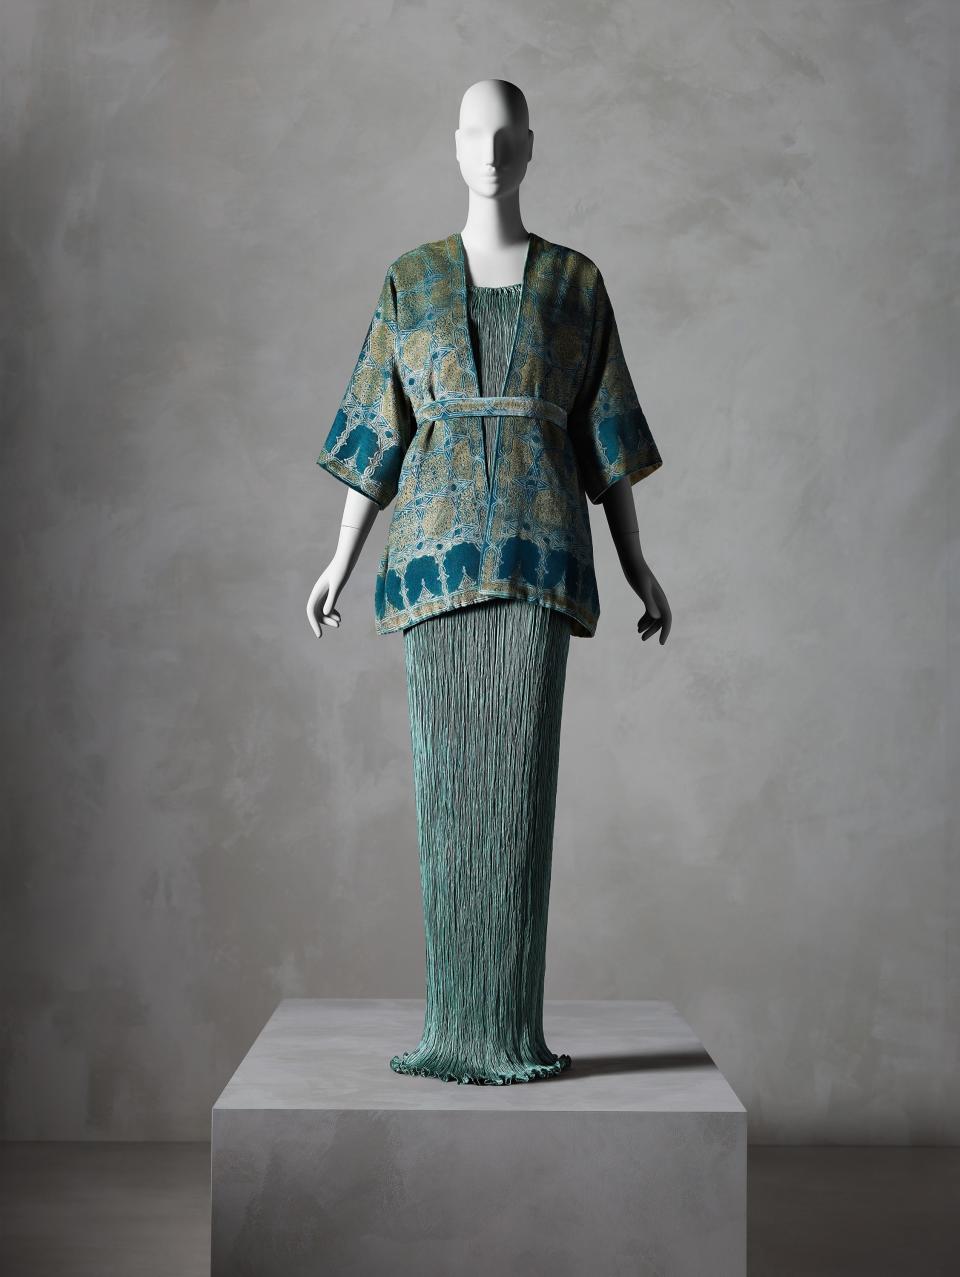 Jacket, Mariano Fortuny y Madrazo (Spanish, 1871–1949), 1920s–30s; Promised gift of Sandy Schreier.